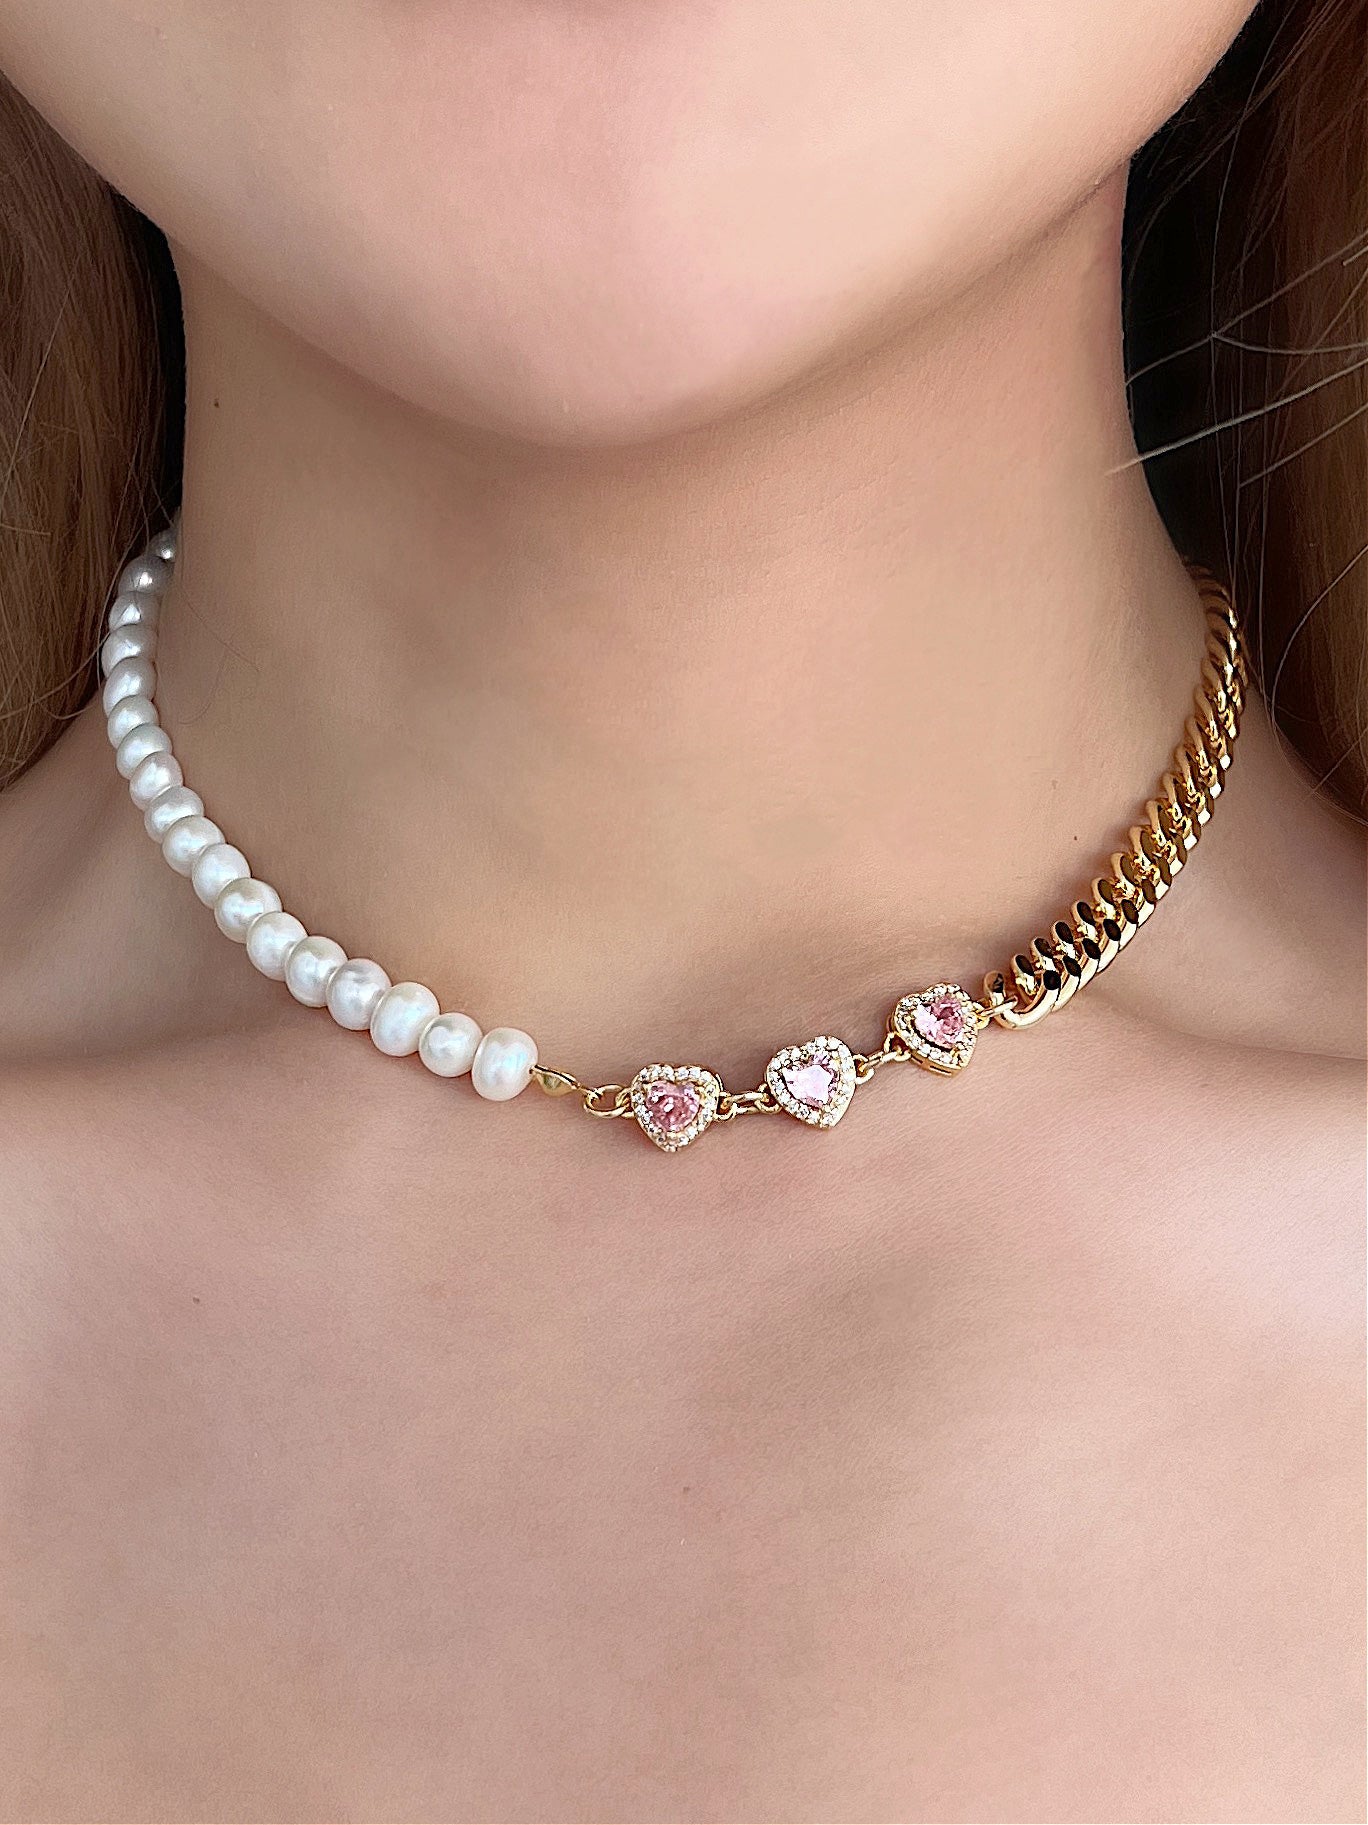 Double Layer Pearl Necklace, Flower Pendant, Gold Chain Necklace, Half  Pearl Half Gold Choker, 2 Strand Necklace, Dainty Statement Necklace - Etsy  | Layered pearl necklace, Necklace, Statement necklace